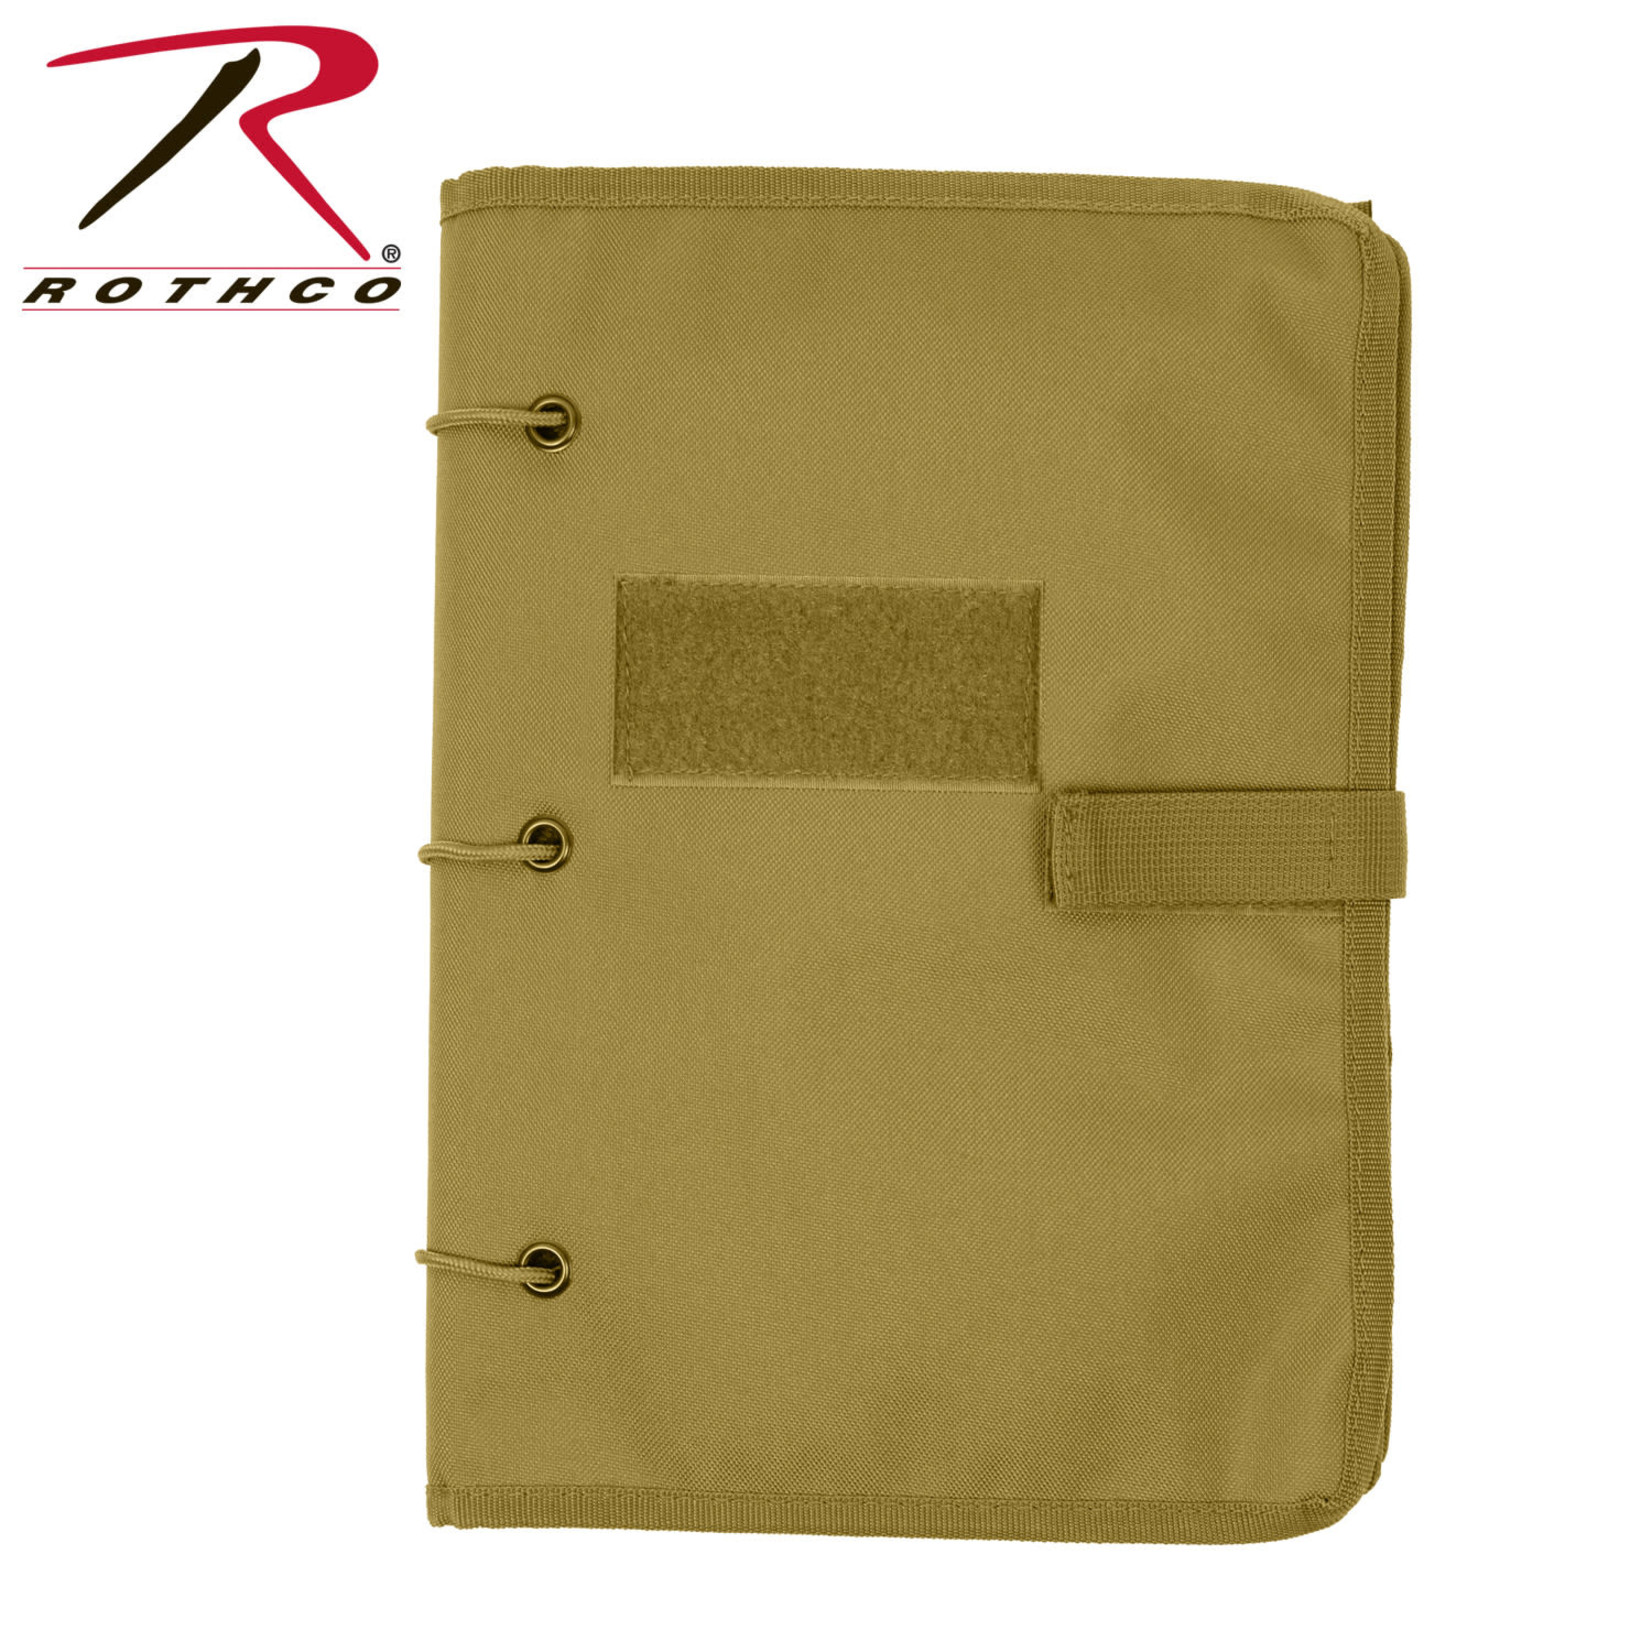 Rothco Rothco Hook & Loop Patch Book